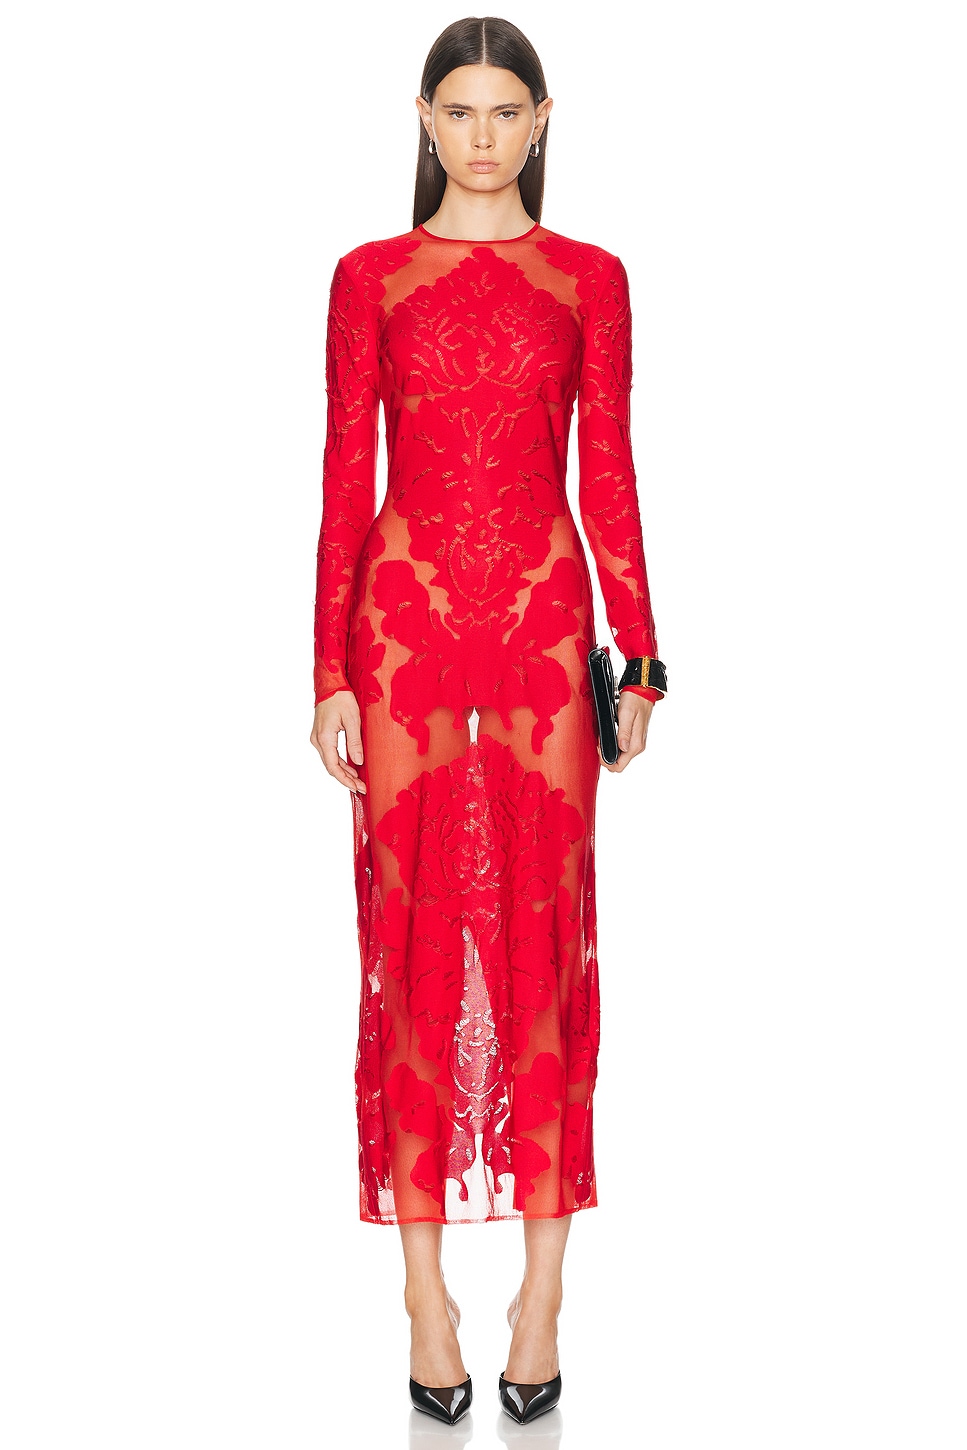 Image 1 of Alexander McQueen Damask Knit Dress in Lust Red